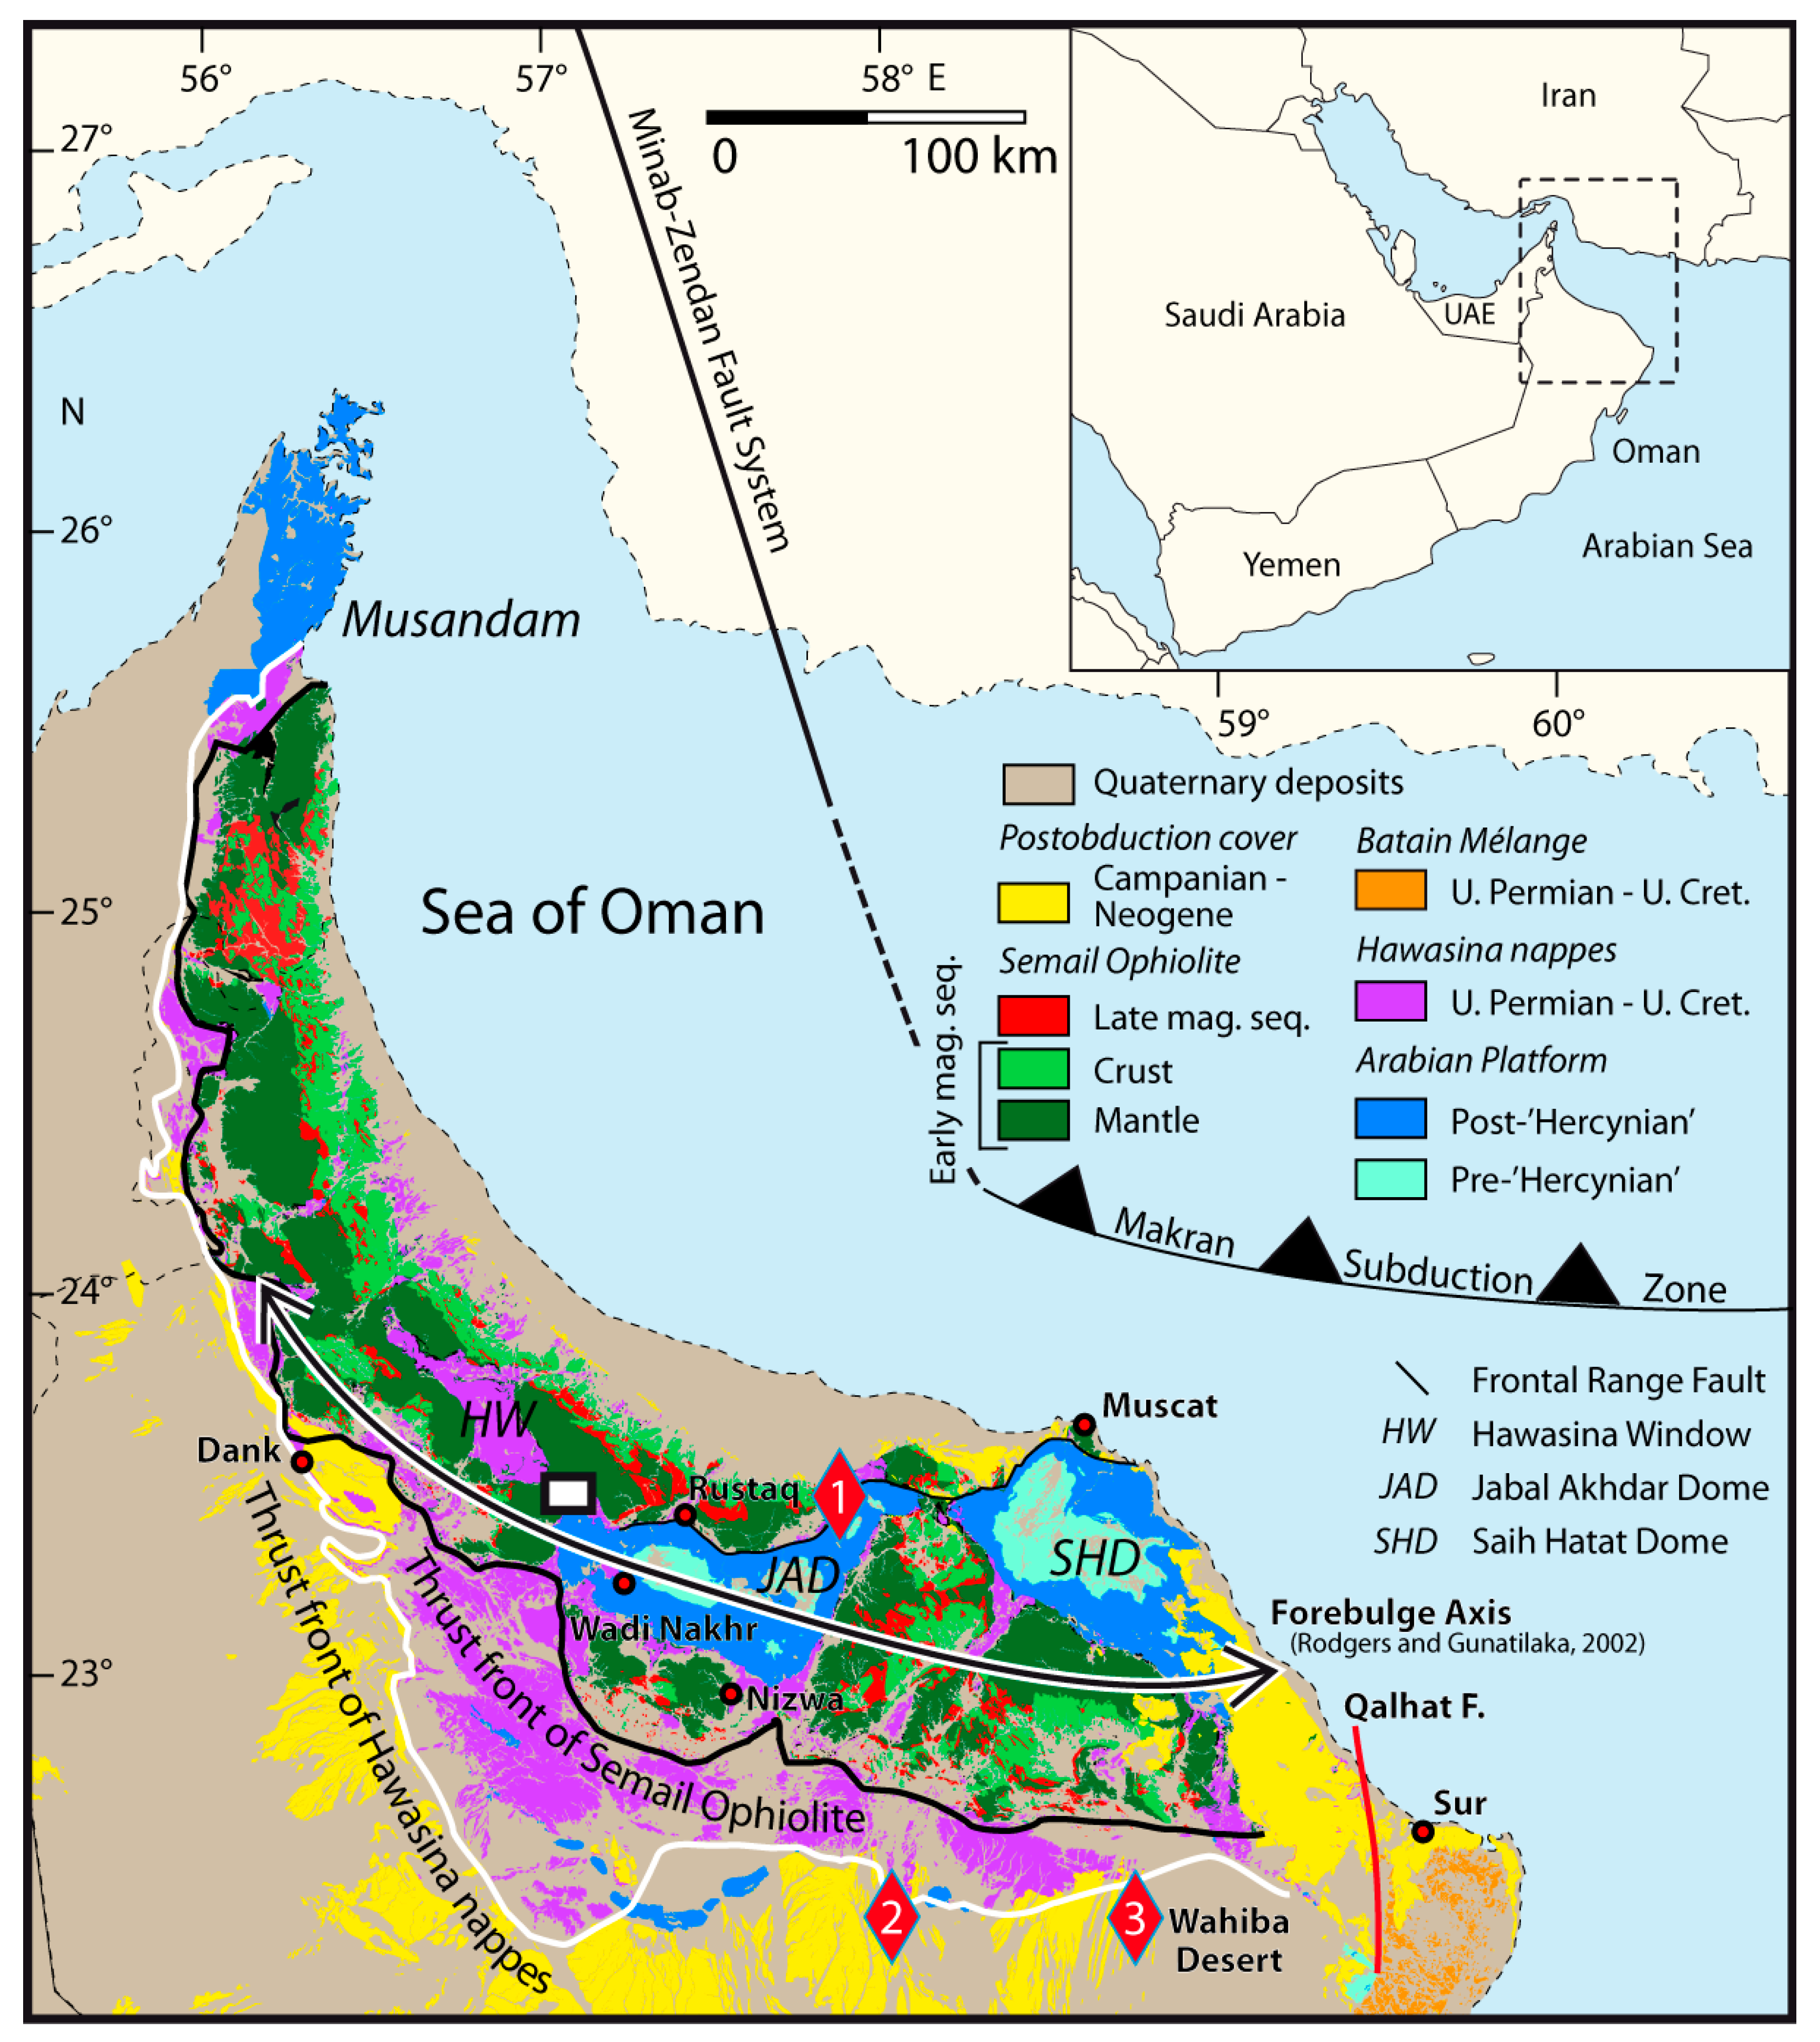 Geosciences | Free Full-Text | Quaternary Thrusting in the Central Oman  Mountains—Novel Observations and Causes: Insights from Optical Stimulate  Luminescence Dating and Kinematic Fault Analyses | HTML